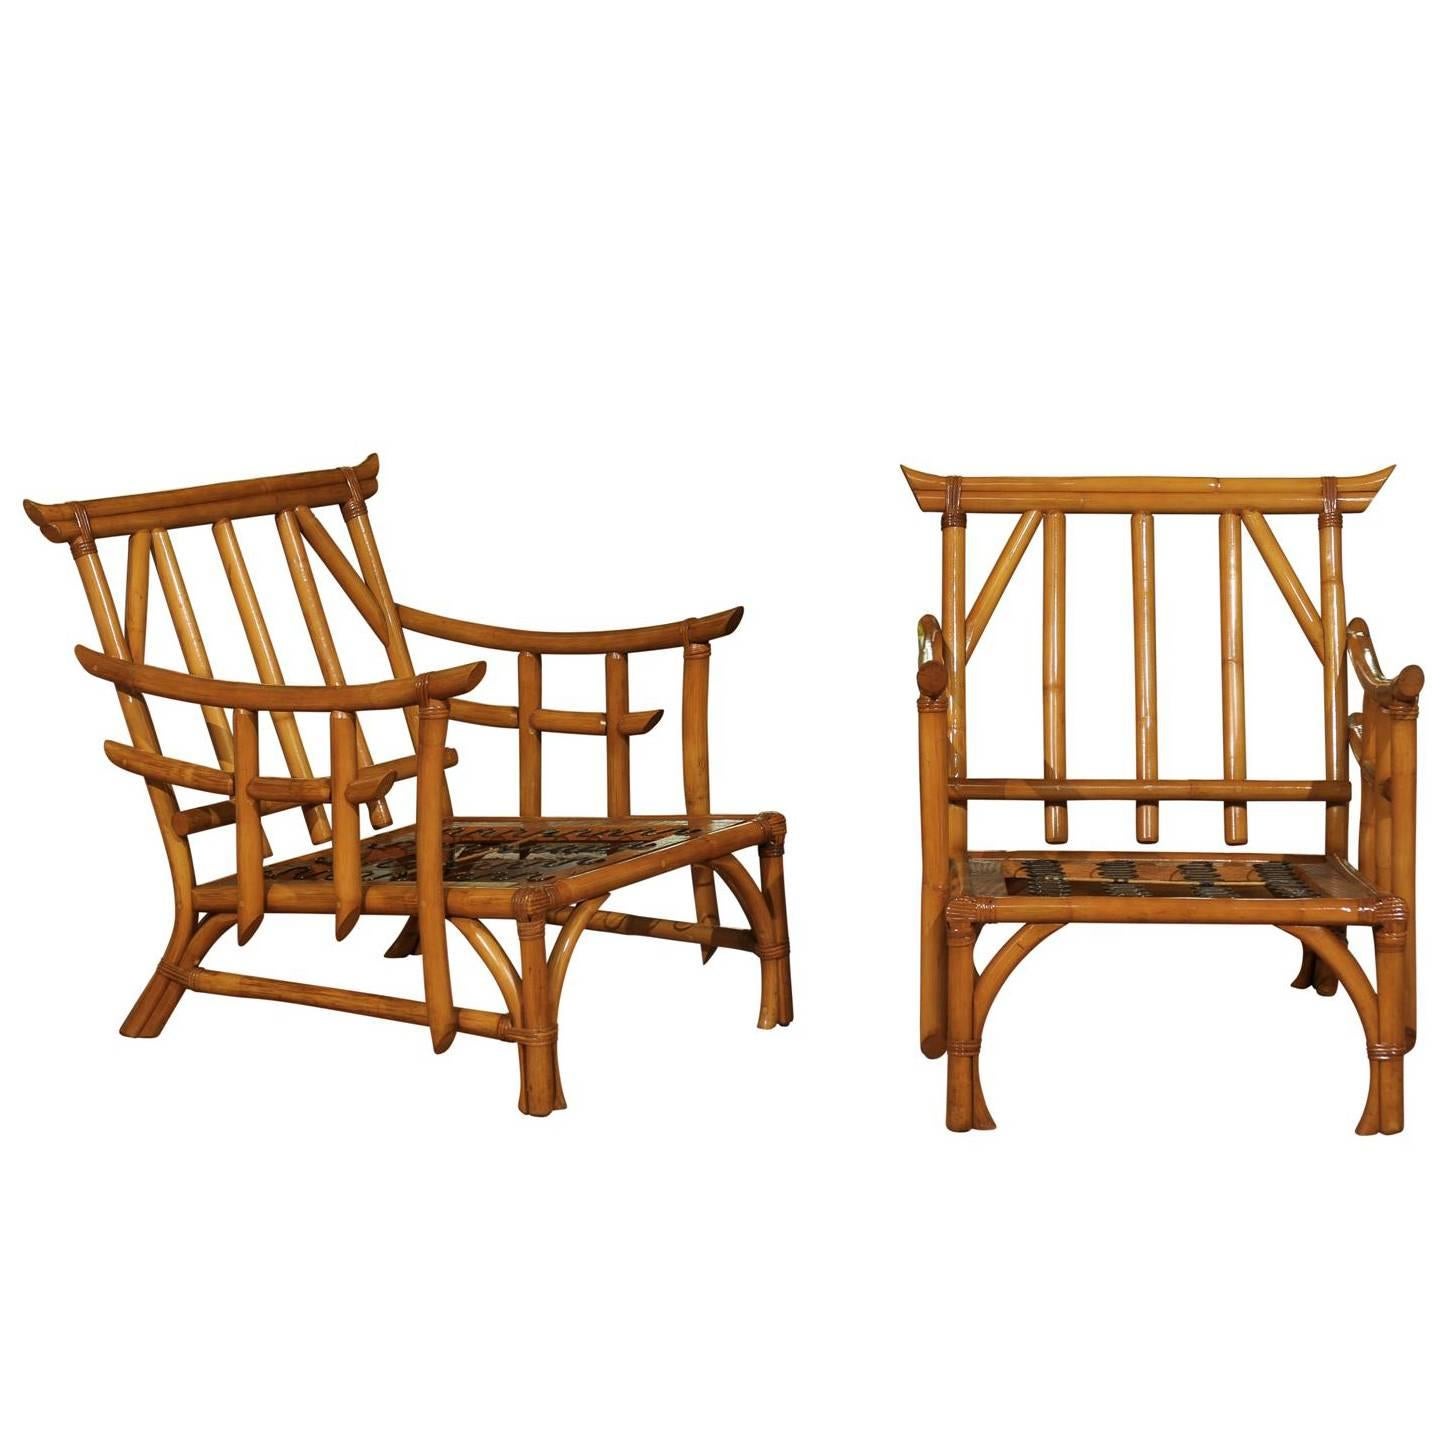 Magnificent Pair of Restored Vintage Rattan Pagoda Lounge Chairs, circa 1960